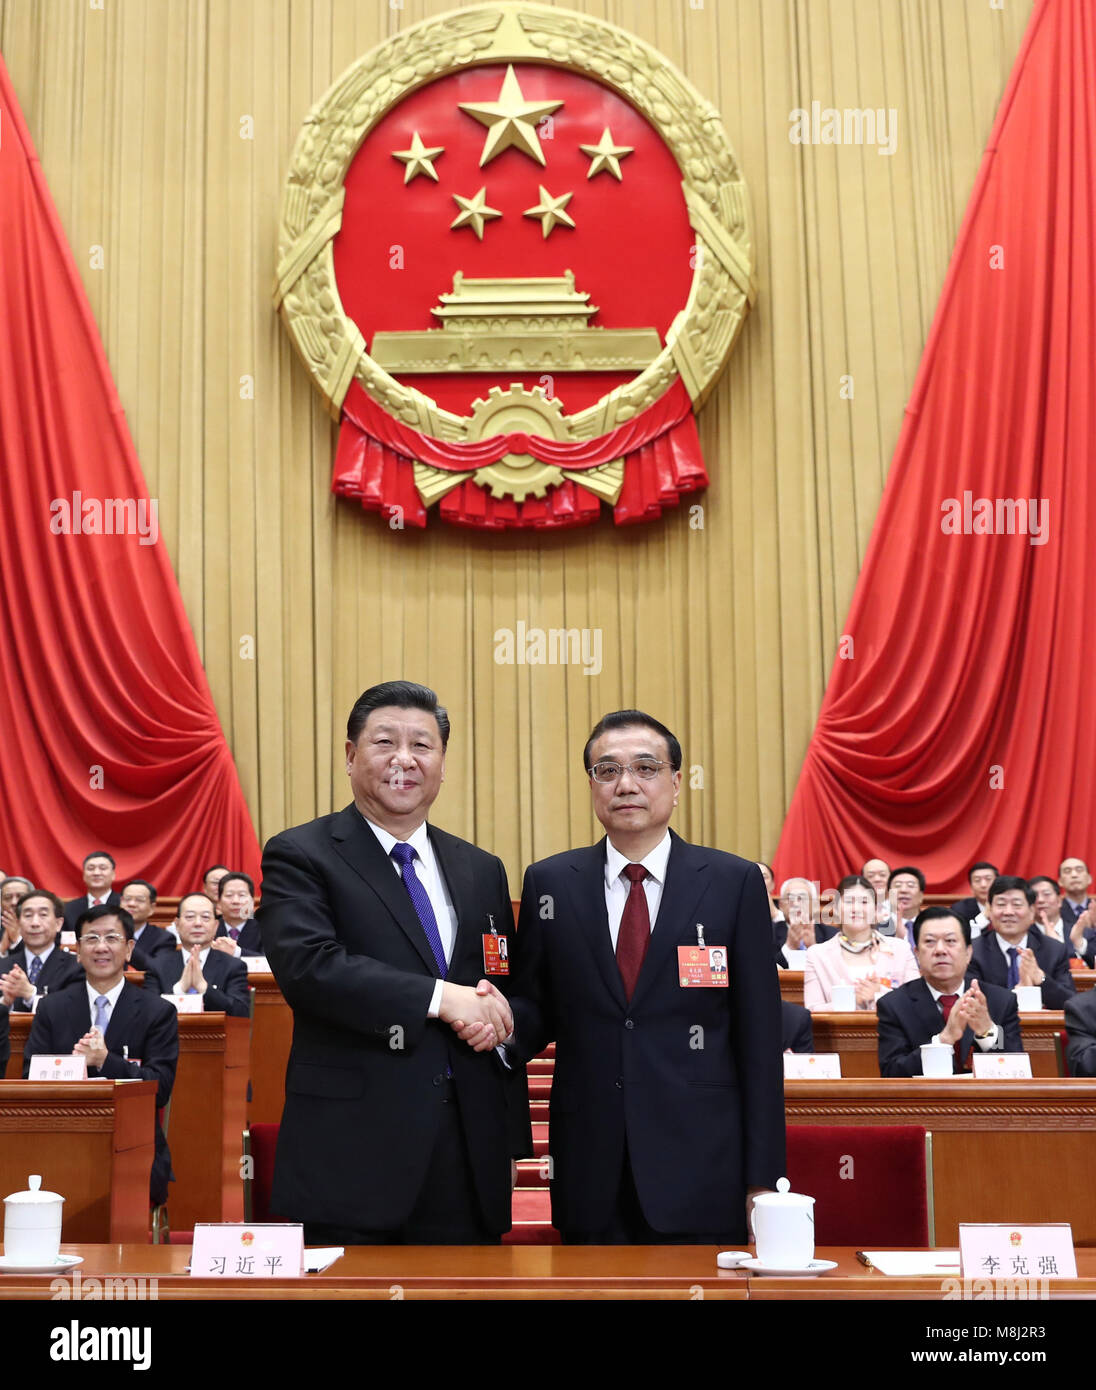 Beijing, China. 18th Mar, 2018. Xi Jinping (L, front) shakes hands with Li Keqiang at the sixth plenary meeting of the first session of the 13th National People's Congress (NPC) at the Great Hall of the People in Beijing, capital of China, March 18, 2018. Li Keqiang was endorsed as Chinese premier Sunday at the ongoing first session of the 13th NPC, the country's national legislature. Nearly 3,000 NPC deputies voted to approve the premiership nomination of Li, by newly-elected President Xi Jinping. Credit: Ju Peng/Xinhua/Alamy Live News Stock Photo